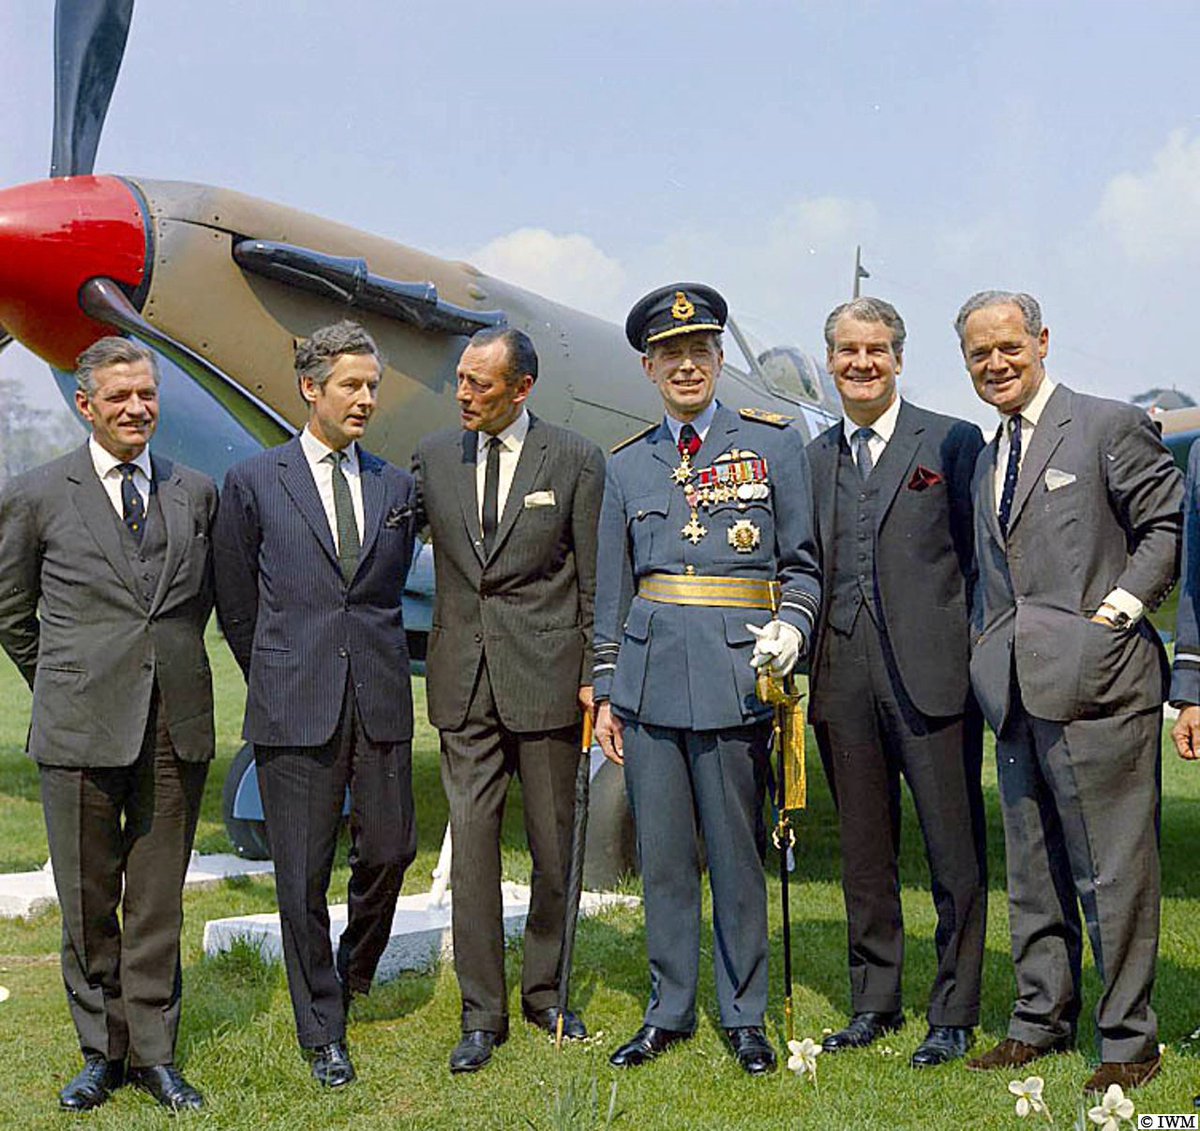 #OTD in 1968, Bentley airfield. In civvies: Air Vice Marshal 'Johnny' Johnson CBE DSO** DFC*, Group Captain P.W. Townsend CVO DSO DFC*, Wing Commander R.R.S. Tuck DSO DFC** DFC, Air Commodore A.C. Deere OBE DSO DFC* DFC and Group Captain Sir Douglas Bader CBE DSO* DFC*.